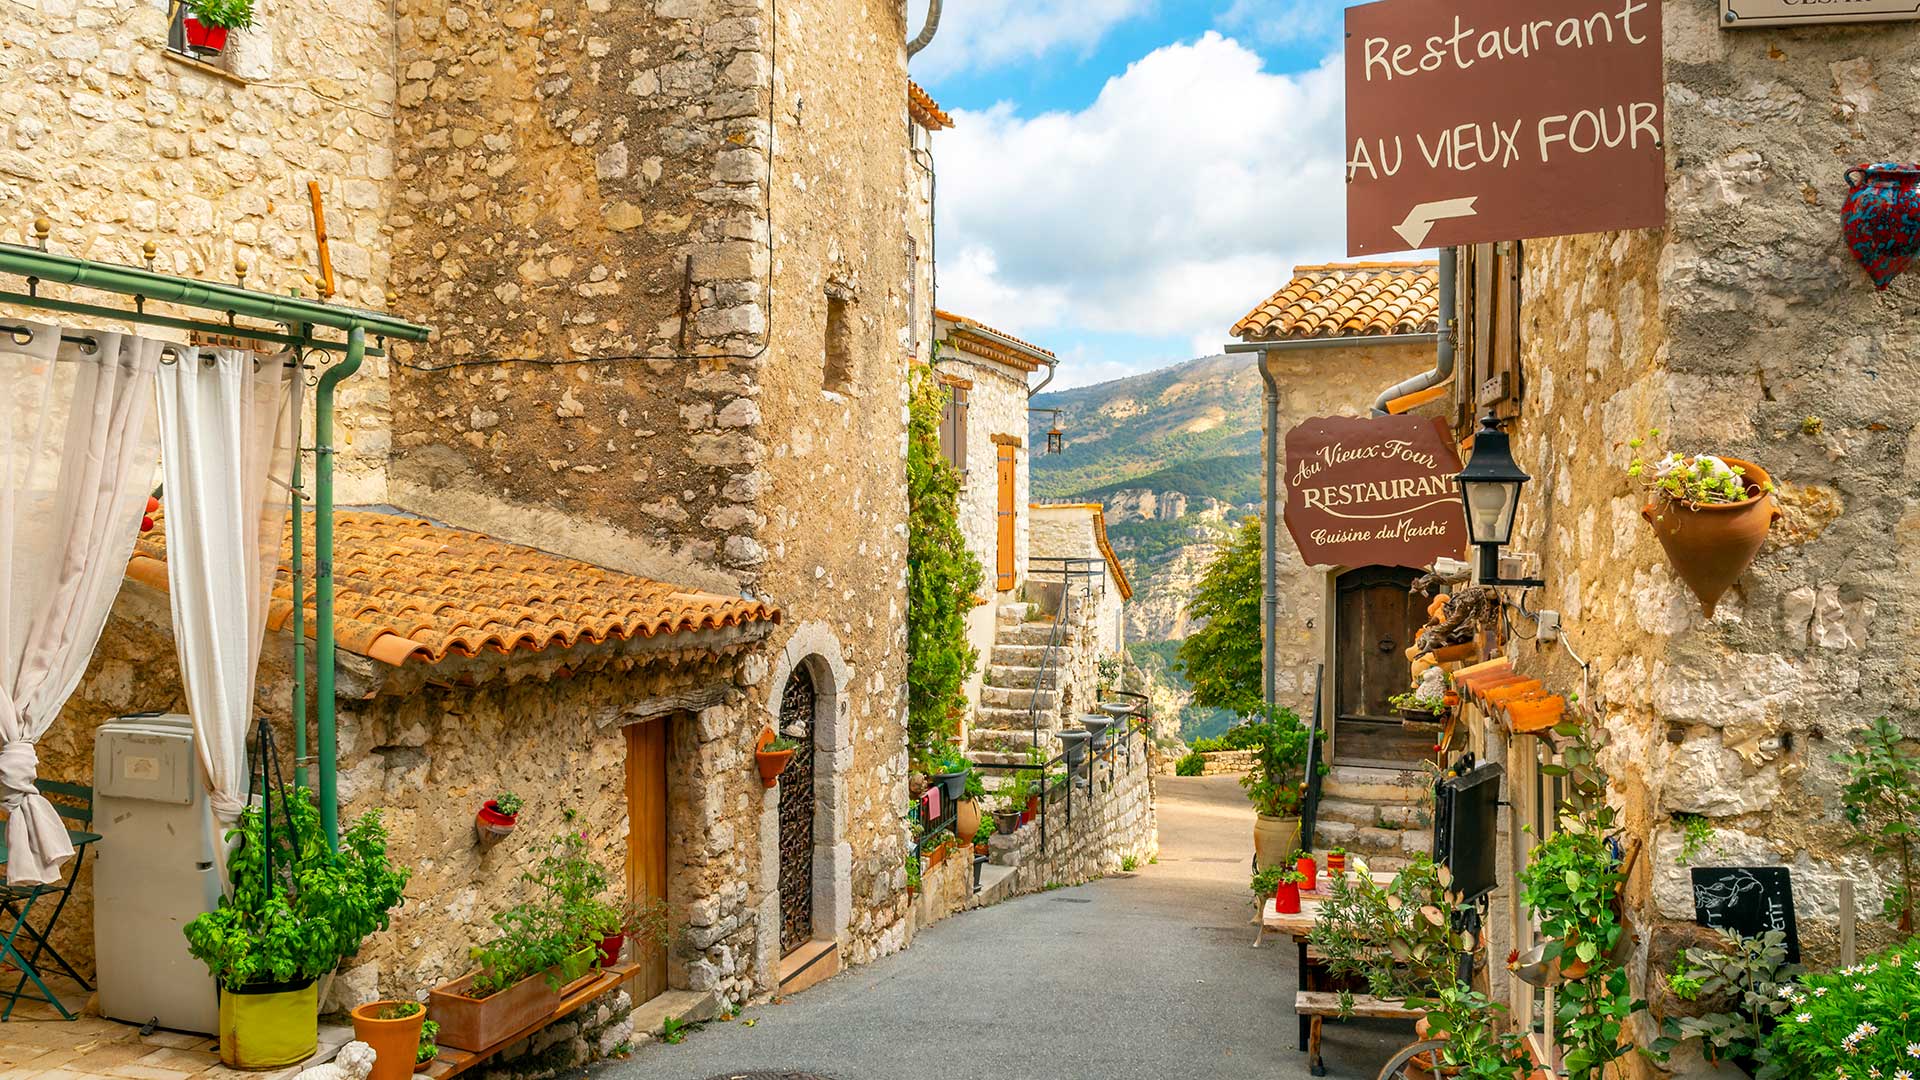 Côte d'Azur: our selection of the most beautiful villages near Nice